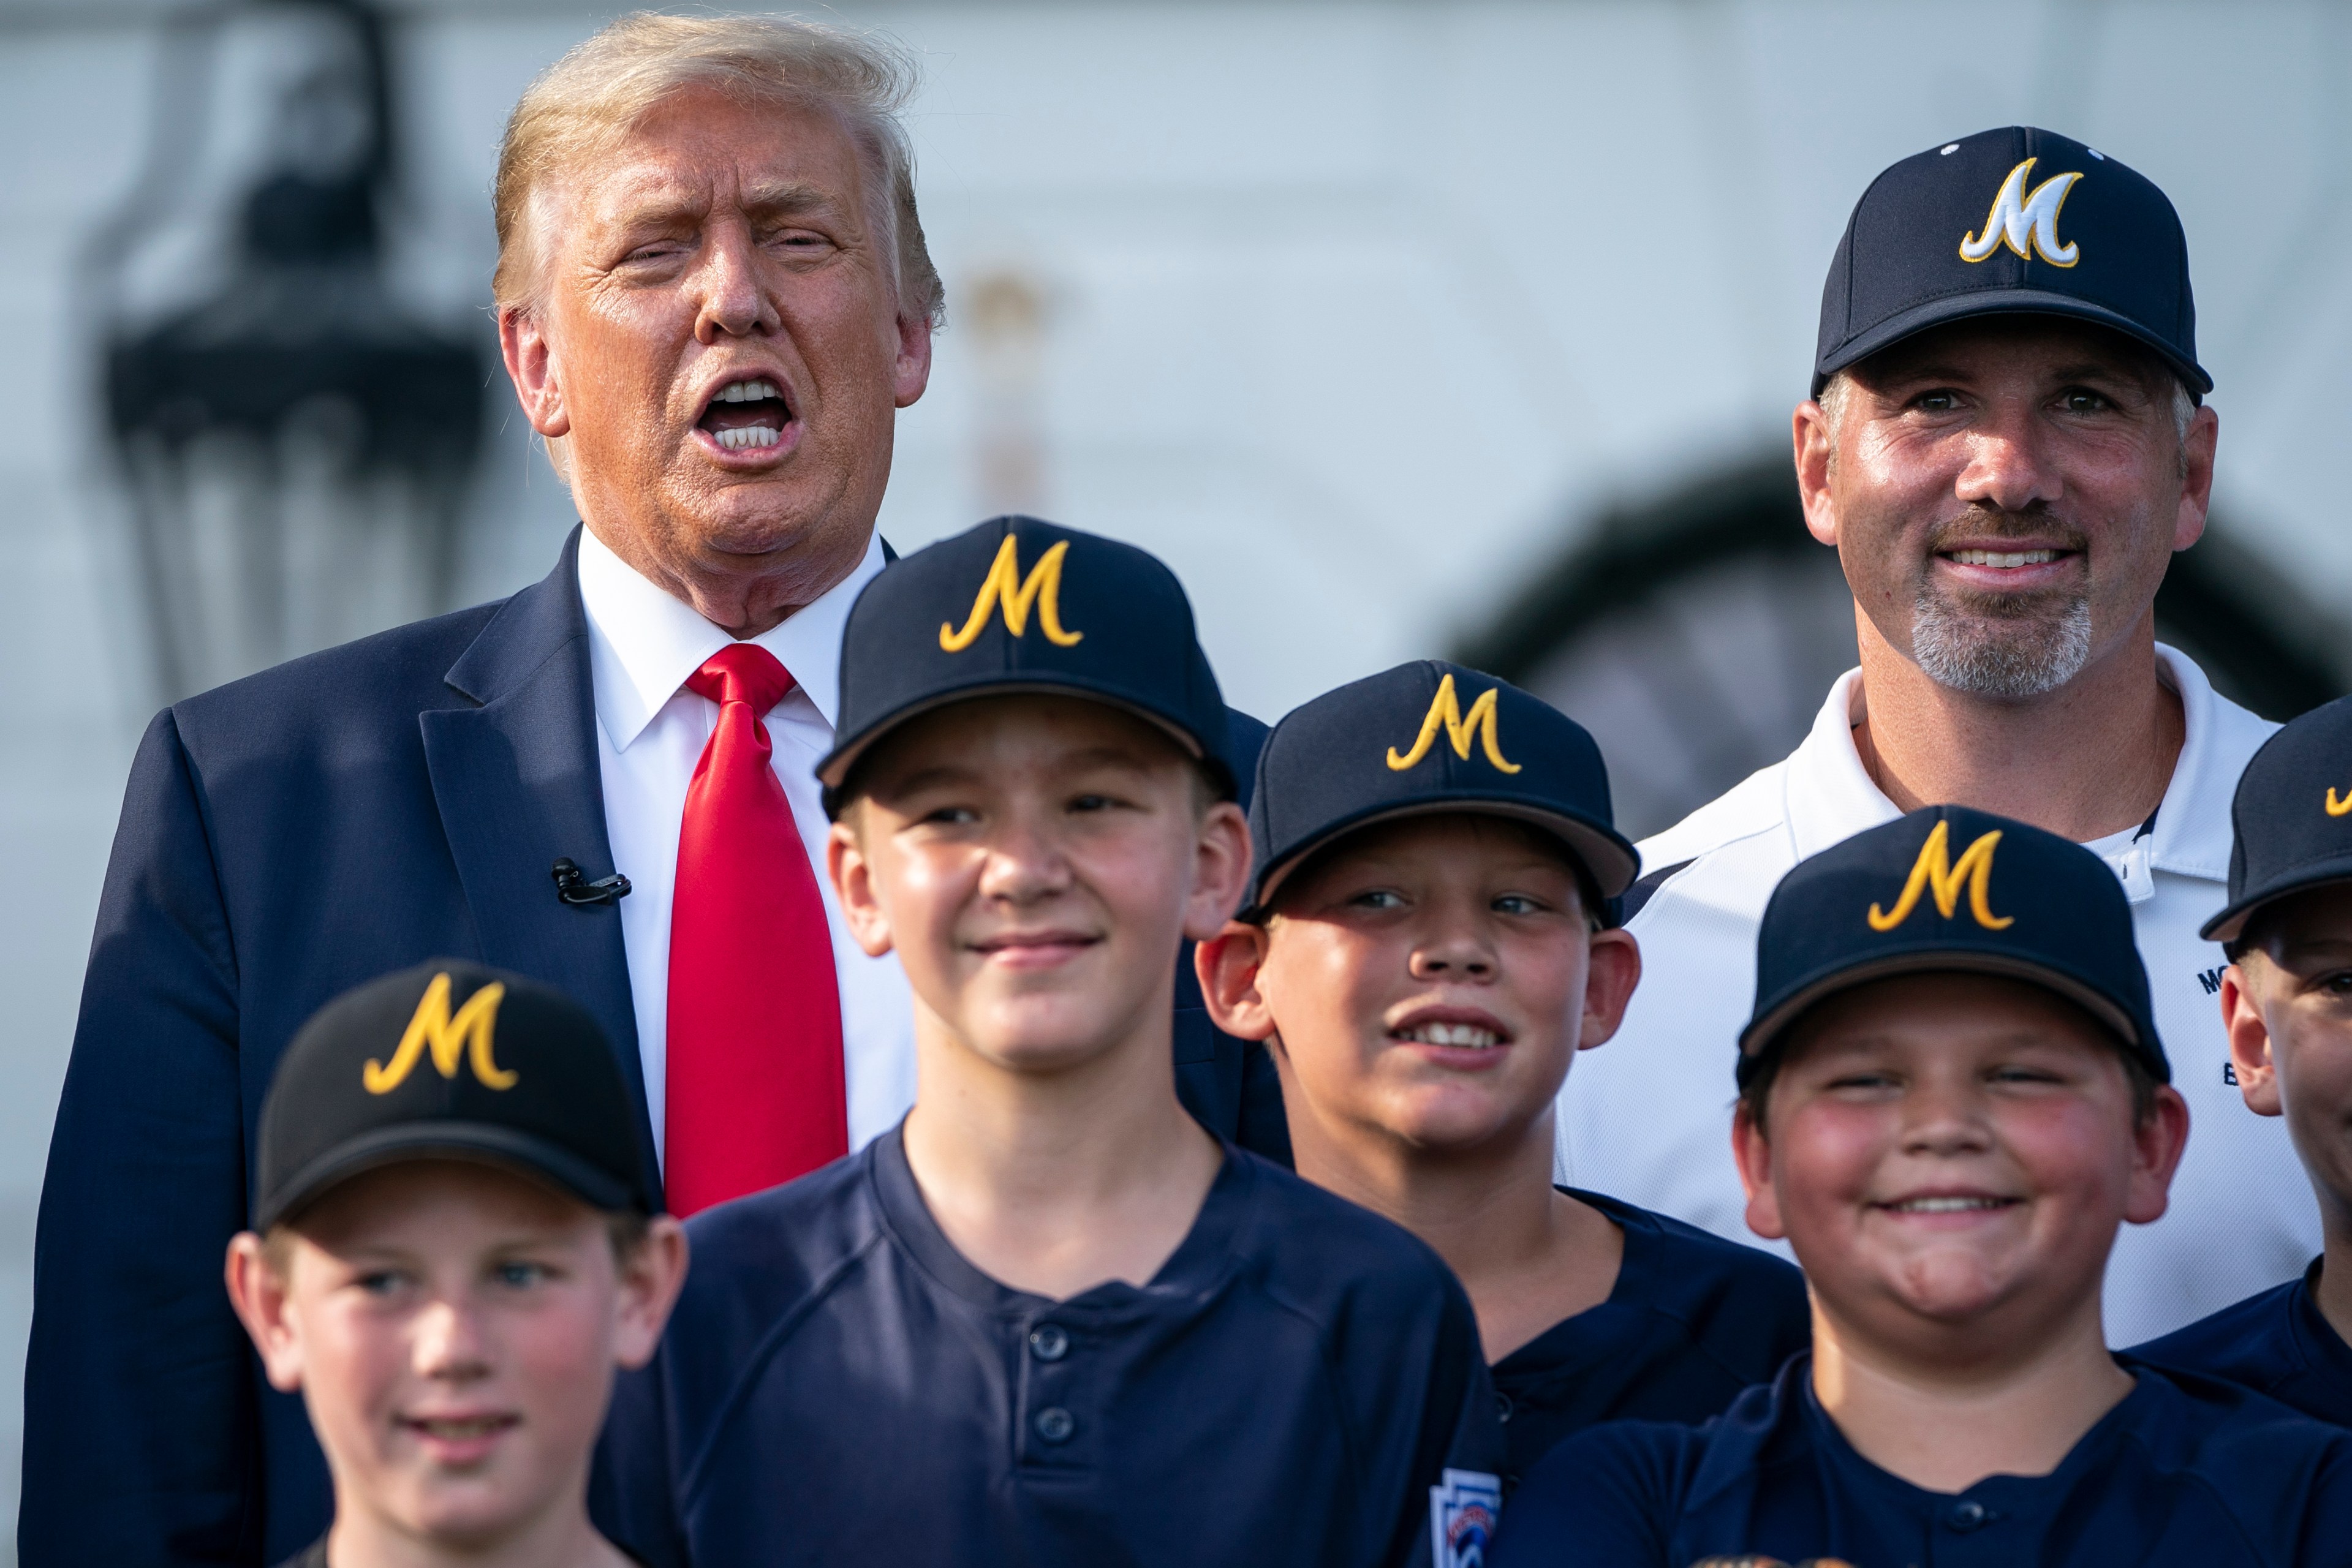 Donald Trump yelling something while posing for a photo with some Little League kids, in 2020.